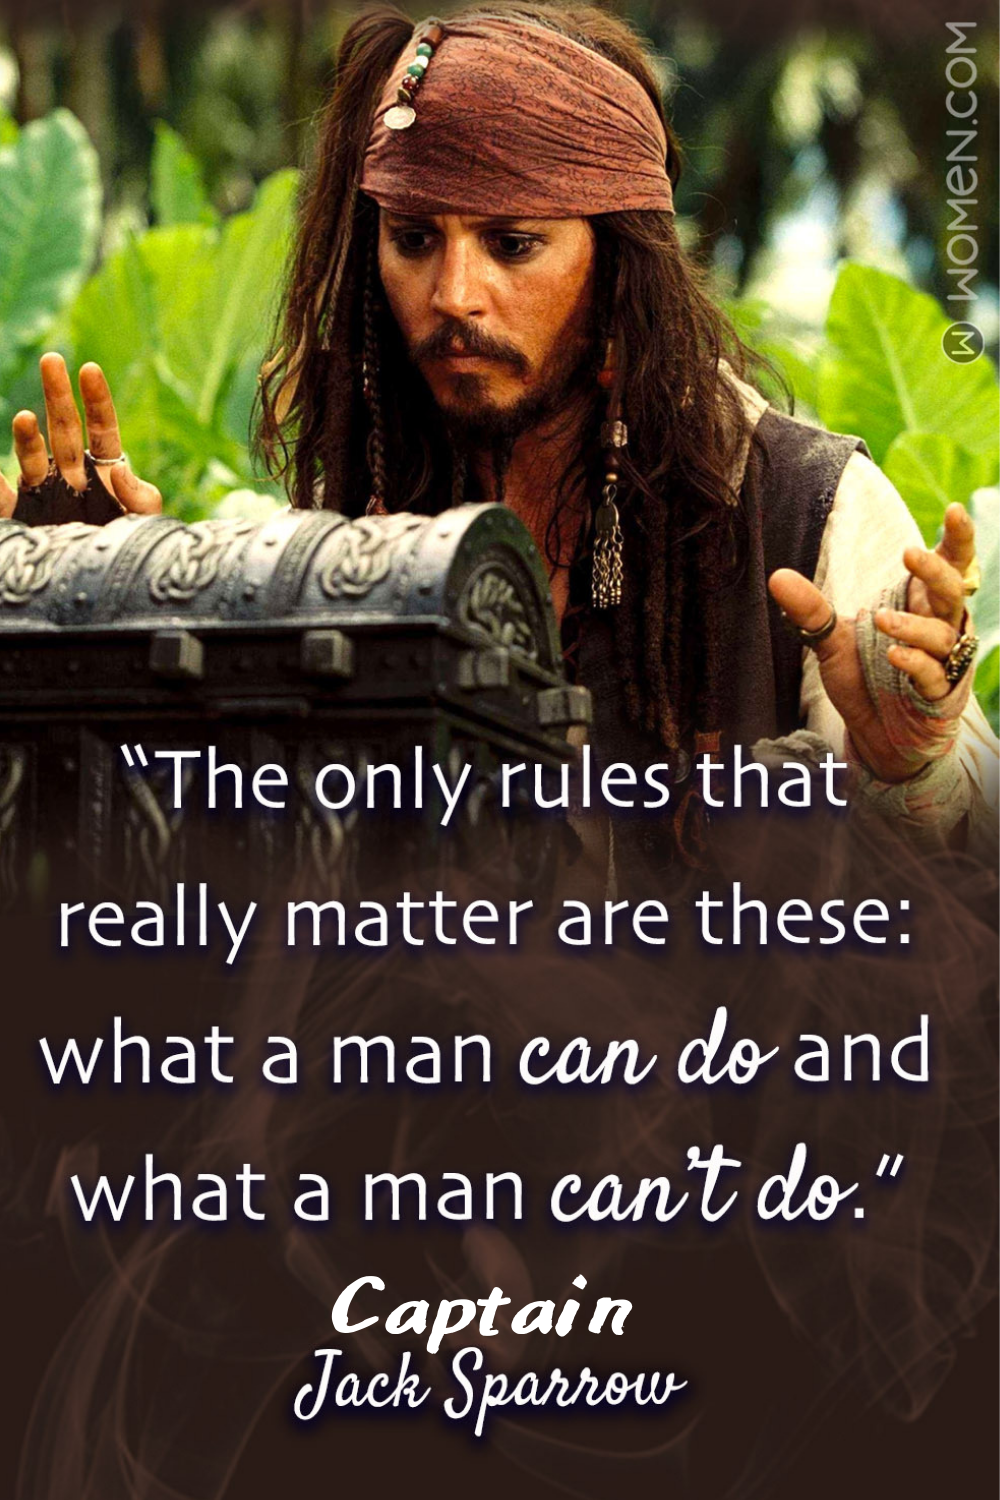 Captain Jack Sparrow Quotes That Every Pirate Should Live By. Captain jack sparrow quotes, Jack sparrow quotes, Captain jack sparrow